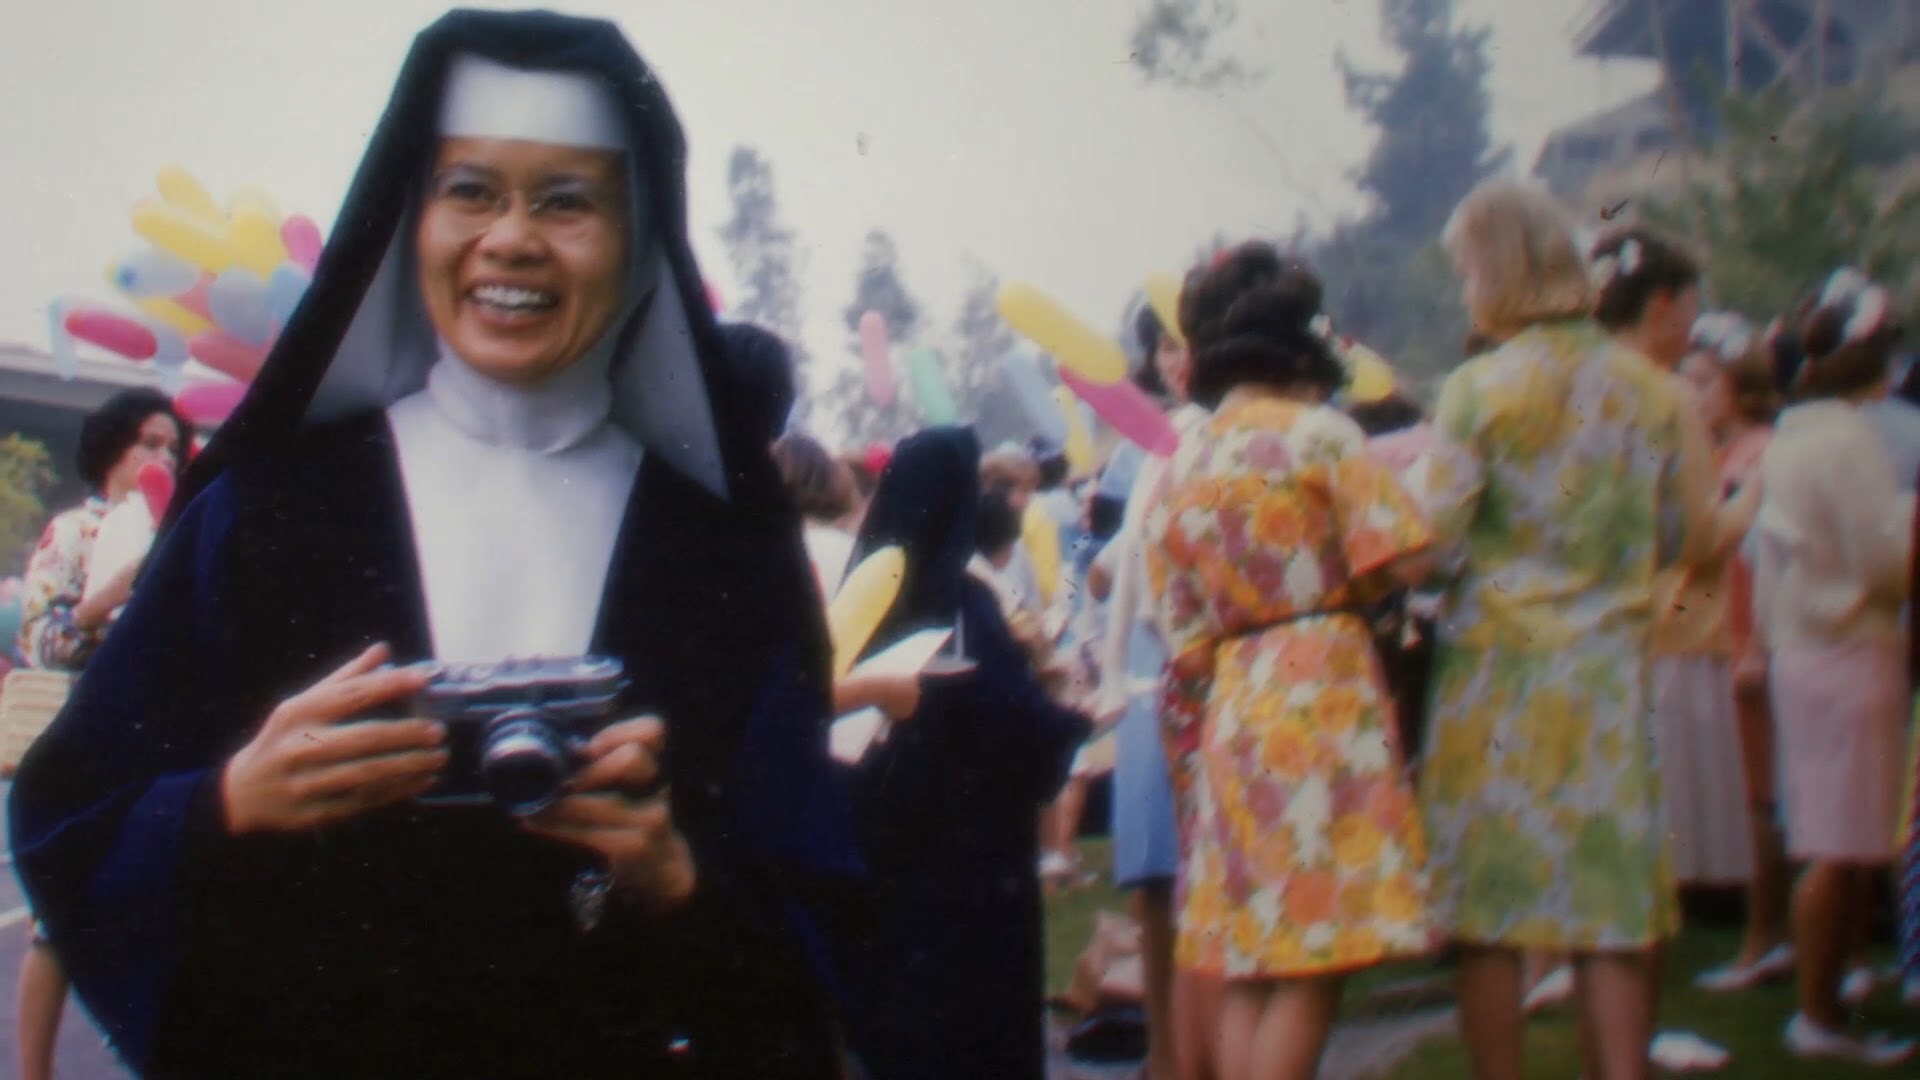 Pedro Kos, Lenore Dowling, and Rosa Manriquez on the History of Sisters of the Immaculate Heart in Rebel Hearts [Exclusive Interview]